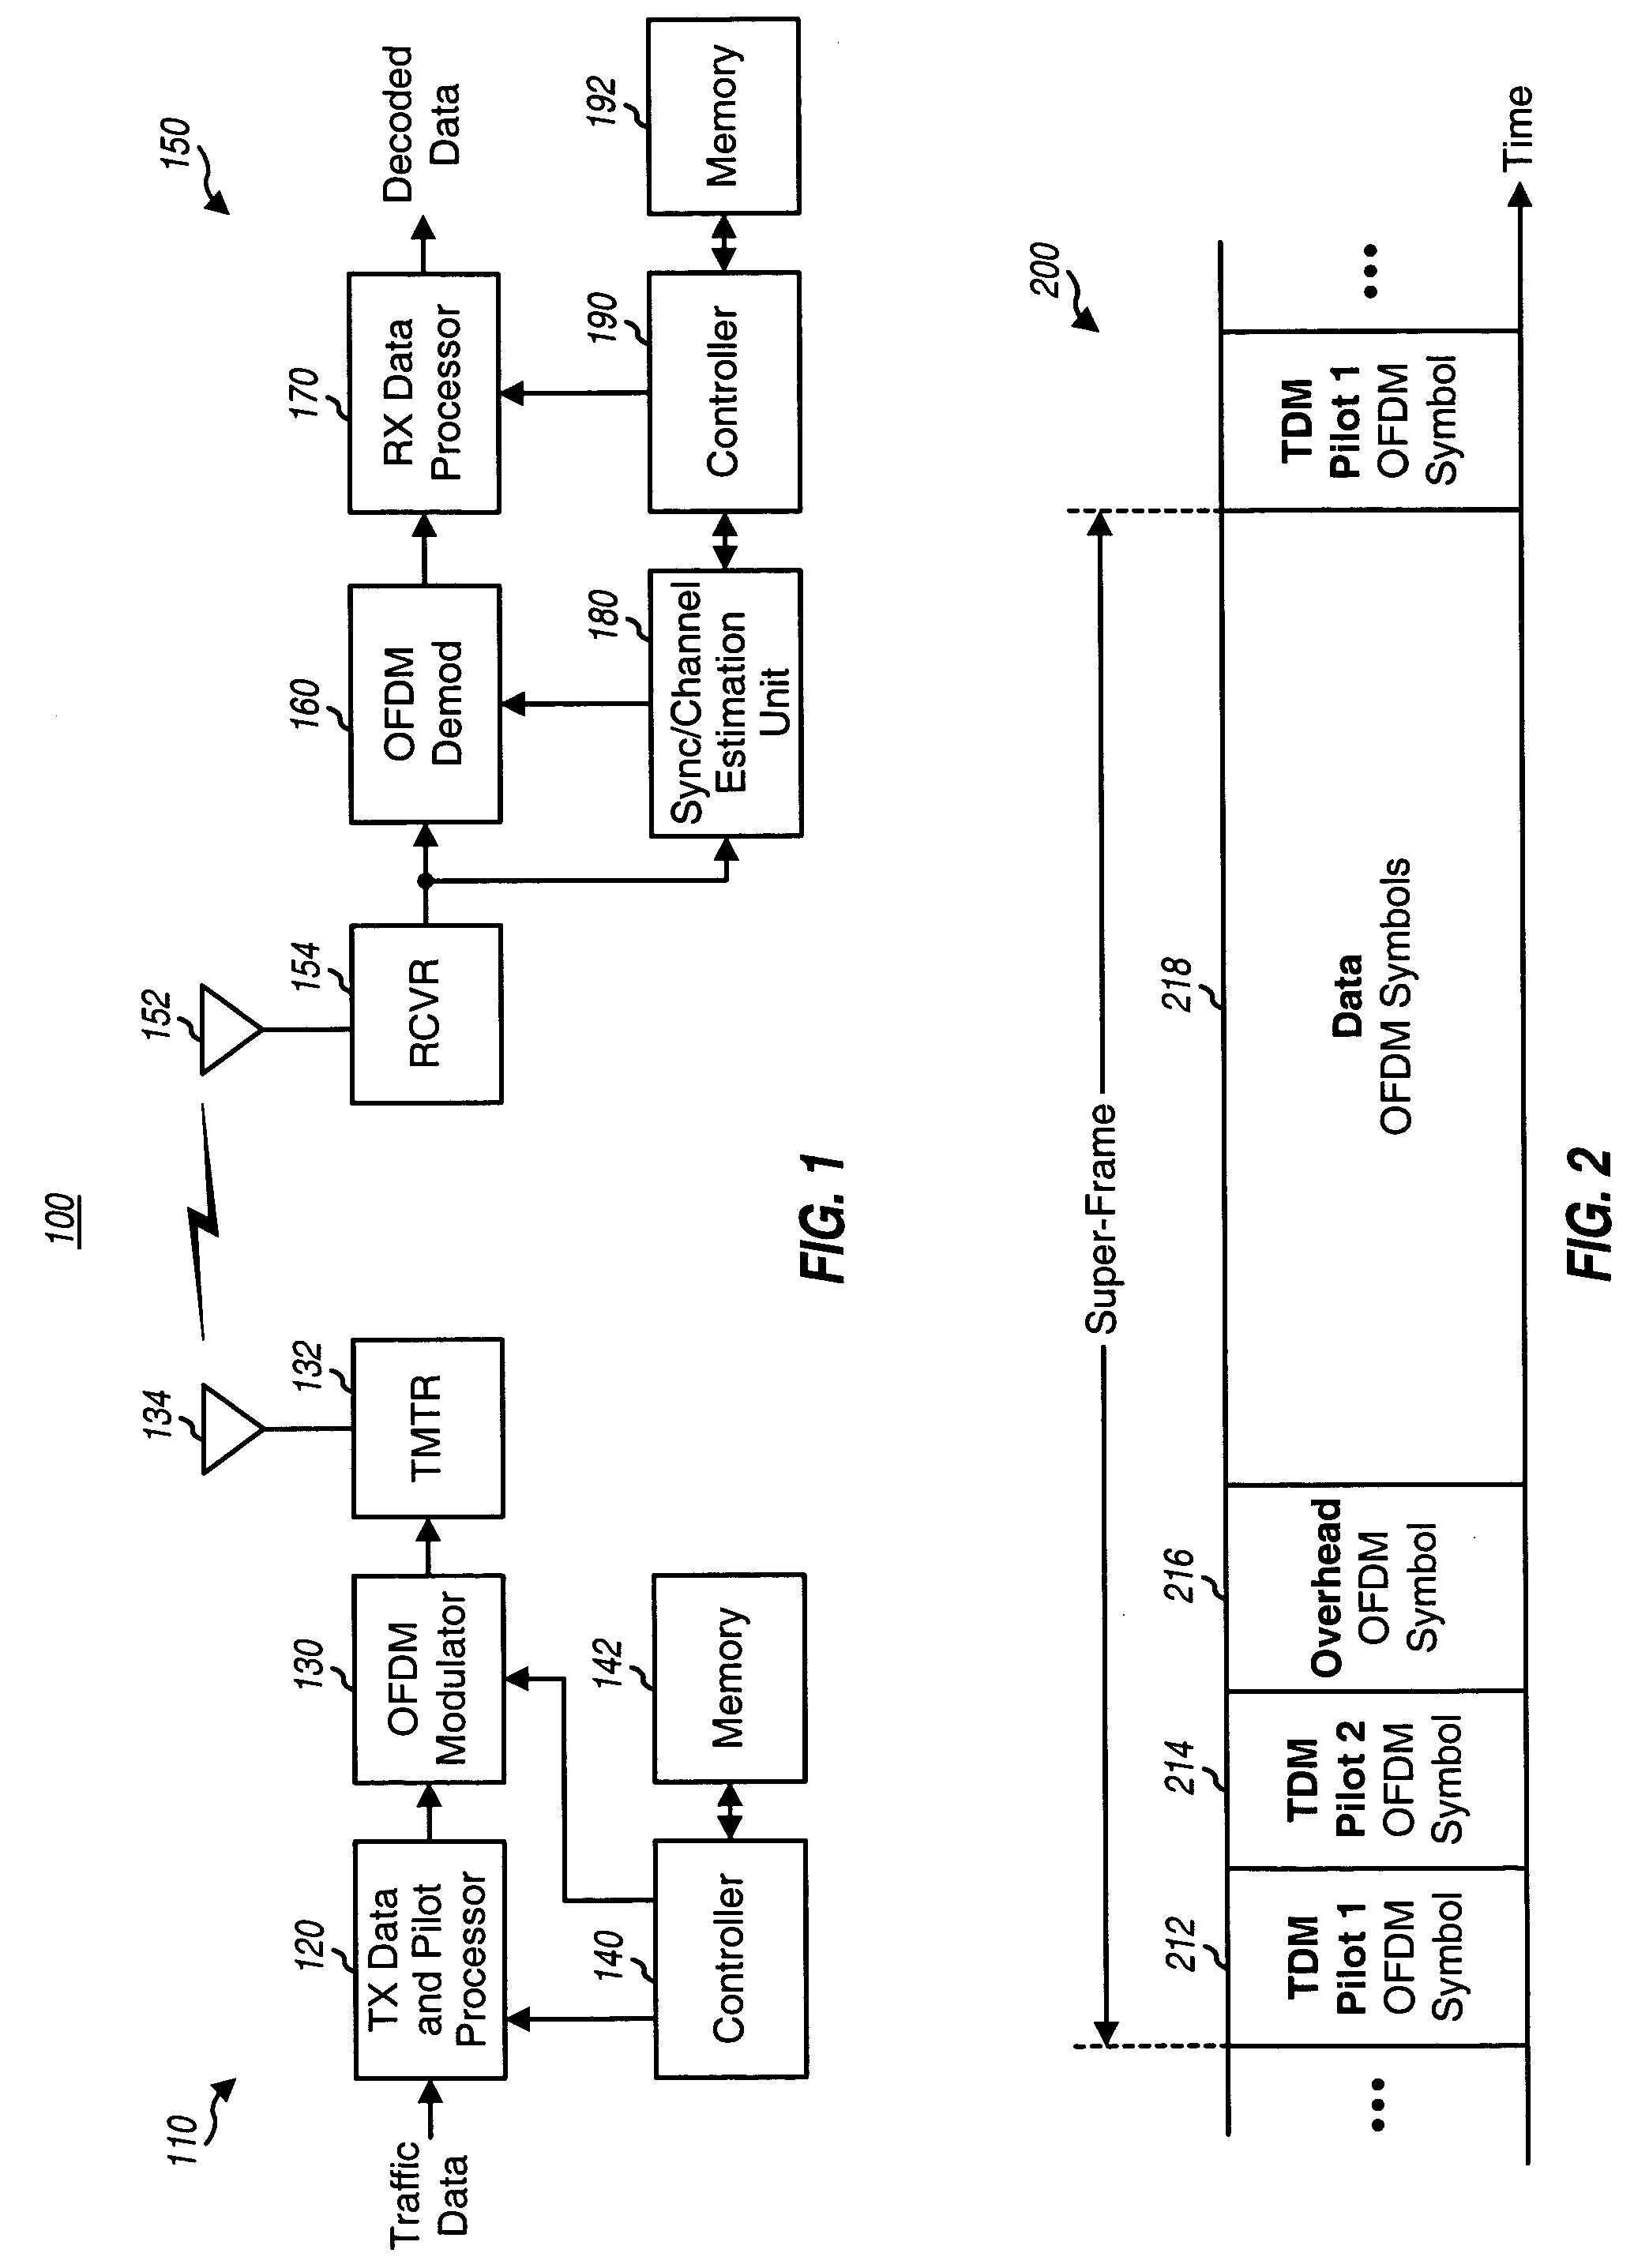 Synchronization in a broadcast OFDM system using time division multiplexed pilots